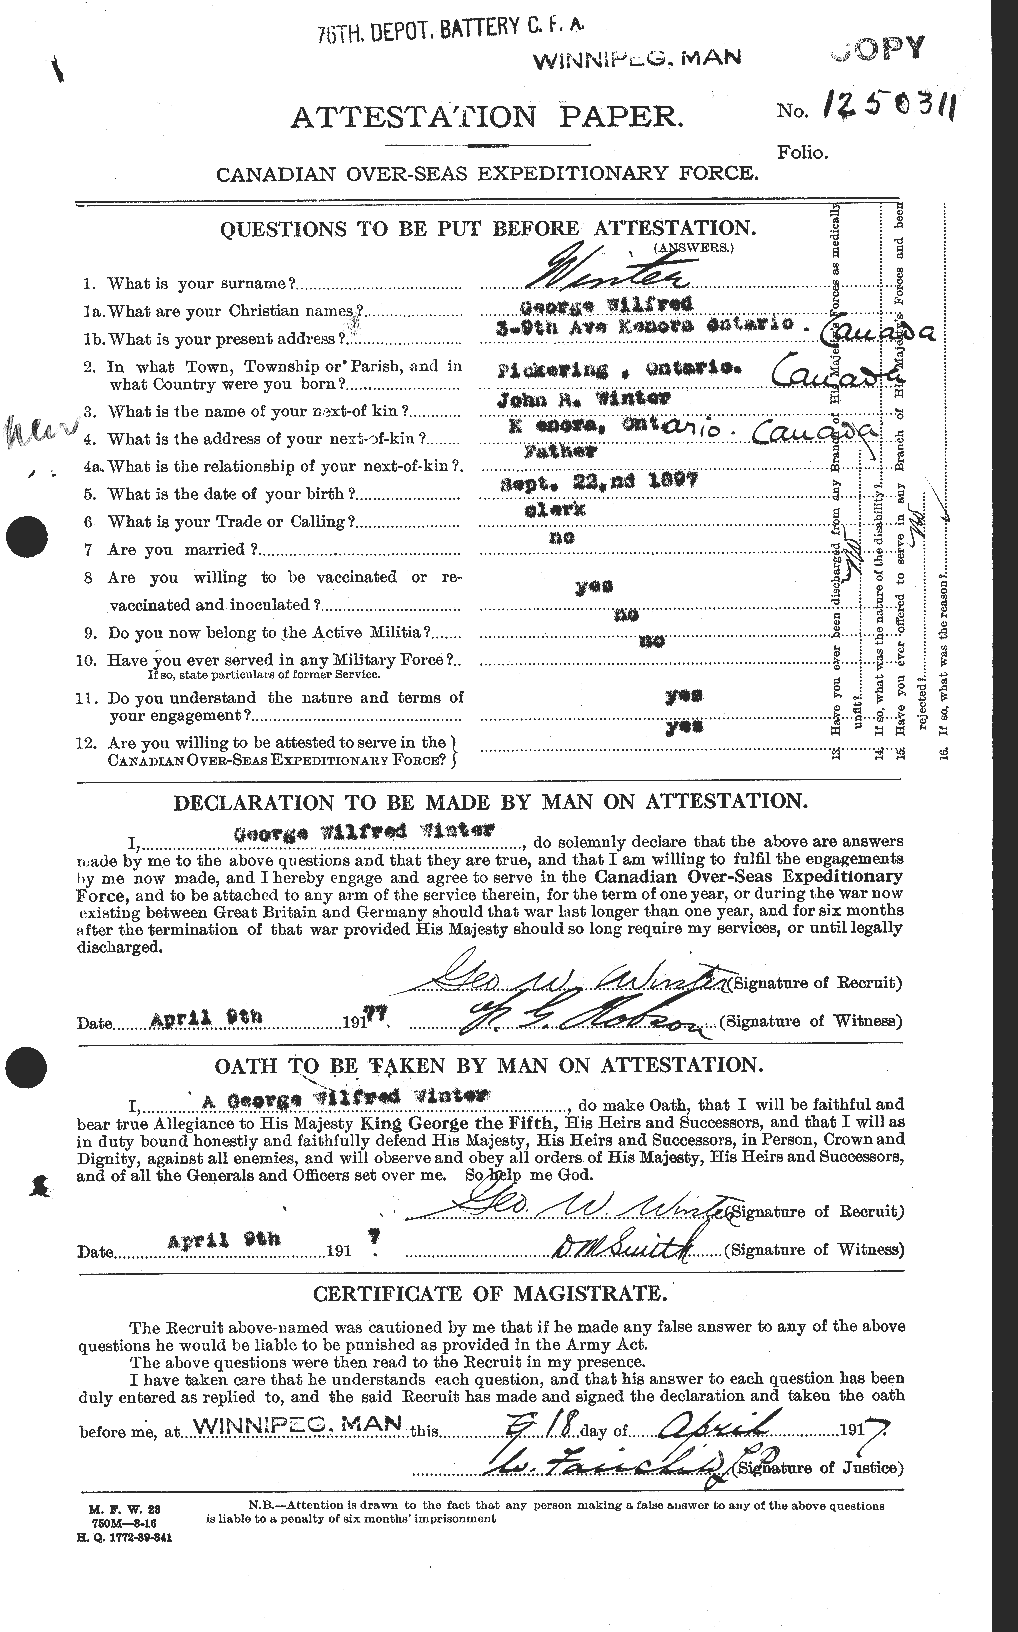 Personnel Records of the First World War - CEF 685721a